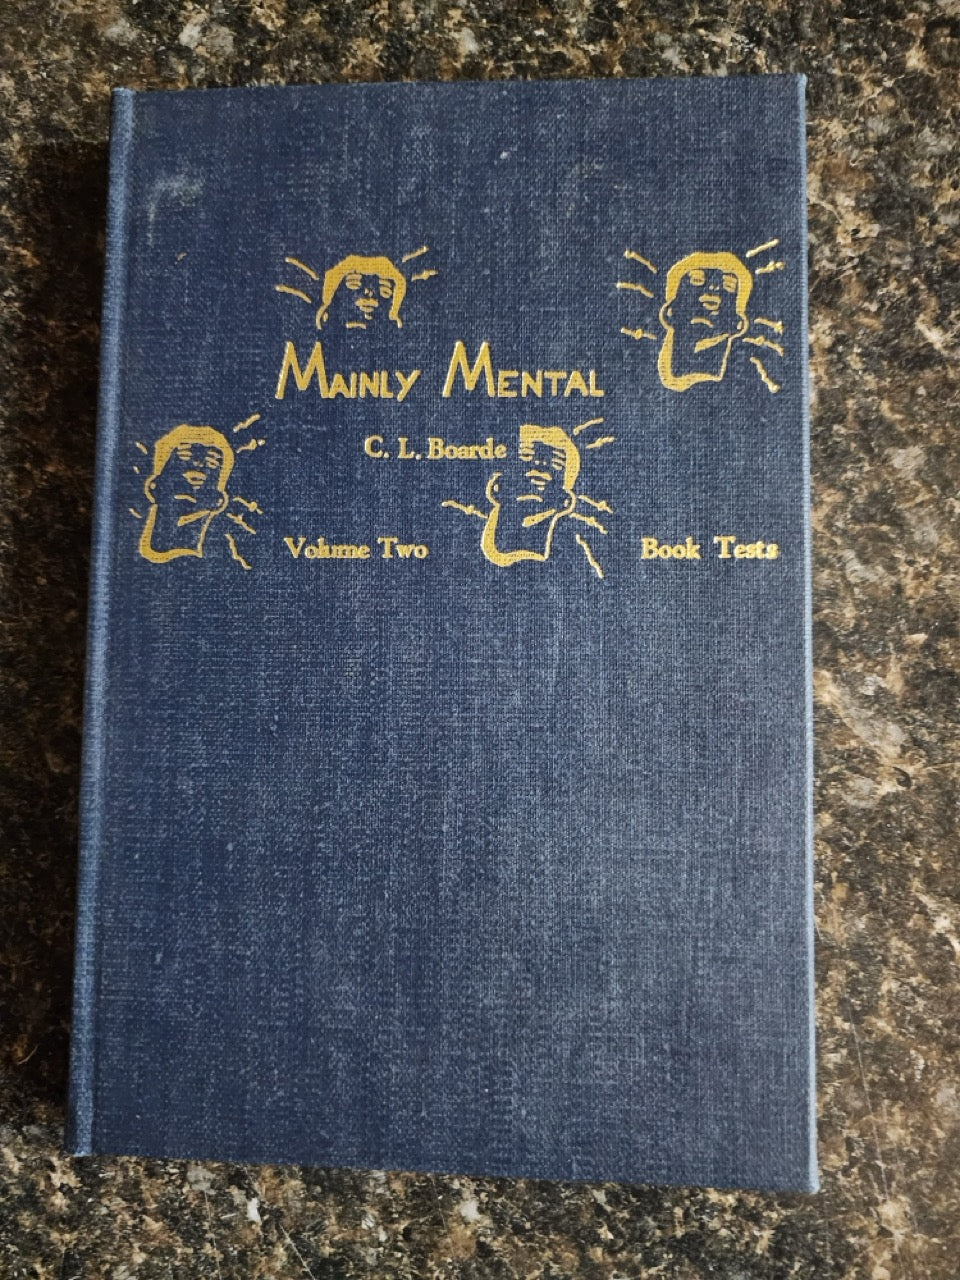 Mainly Mental Vol. 2 - Book Tests - C. L. Boarde